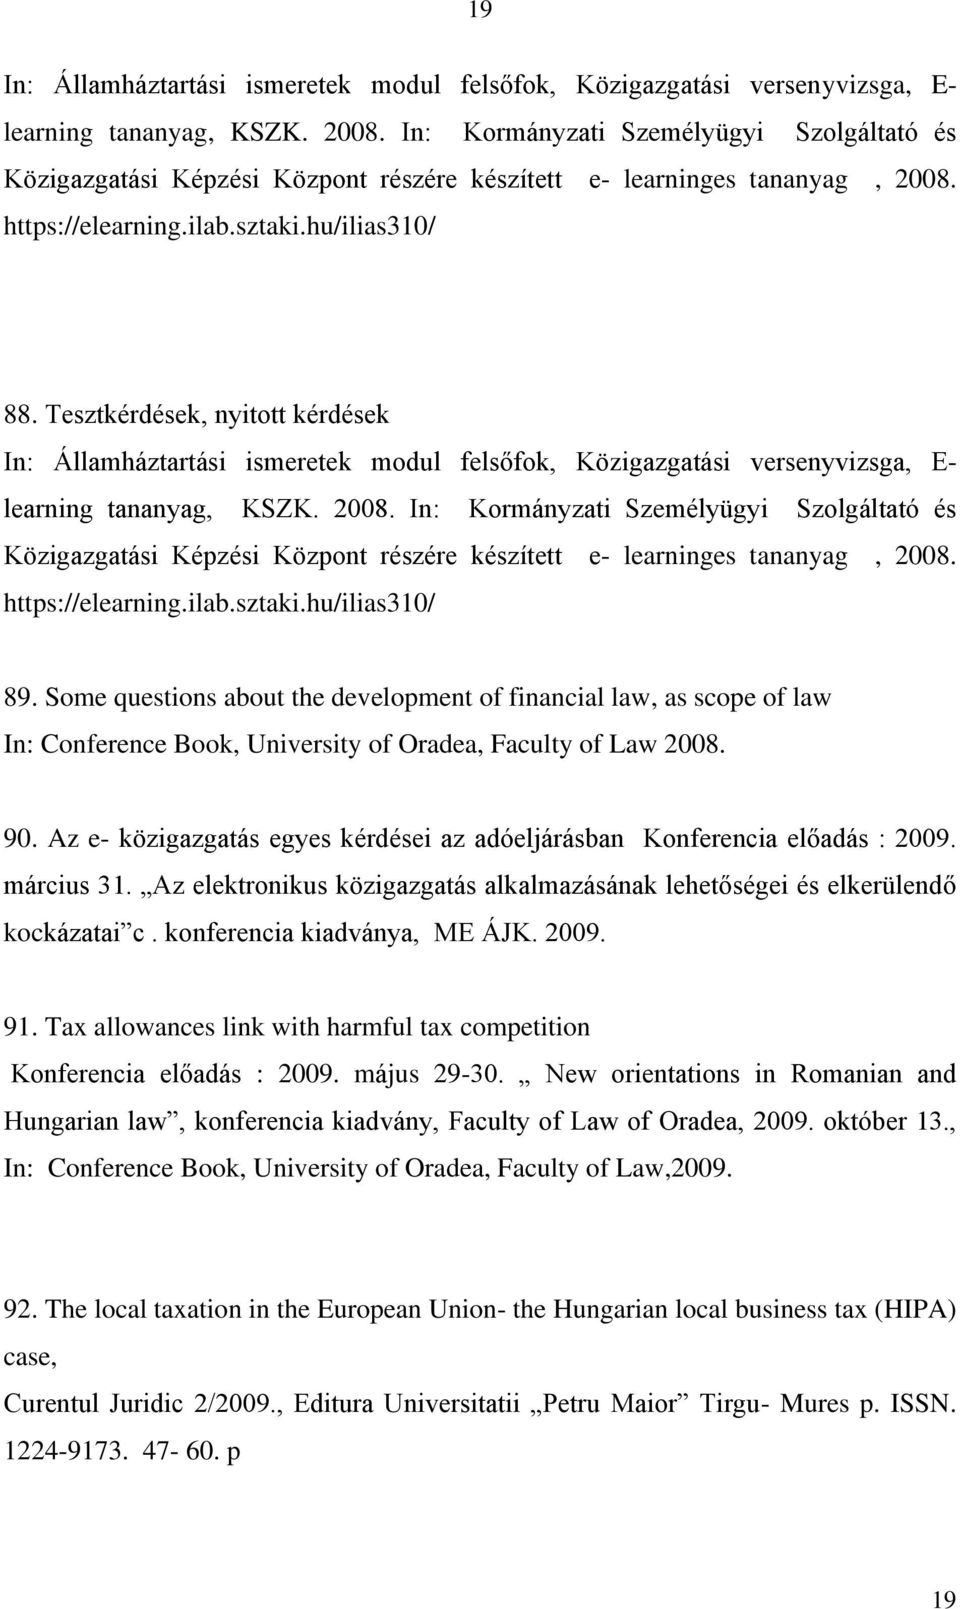 Some questions about the development of financial law, as scope of law In: Conference Book, University of Oradea, Faculty of Law 2008. 90.